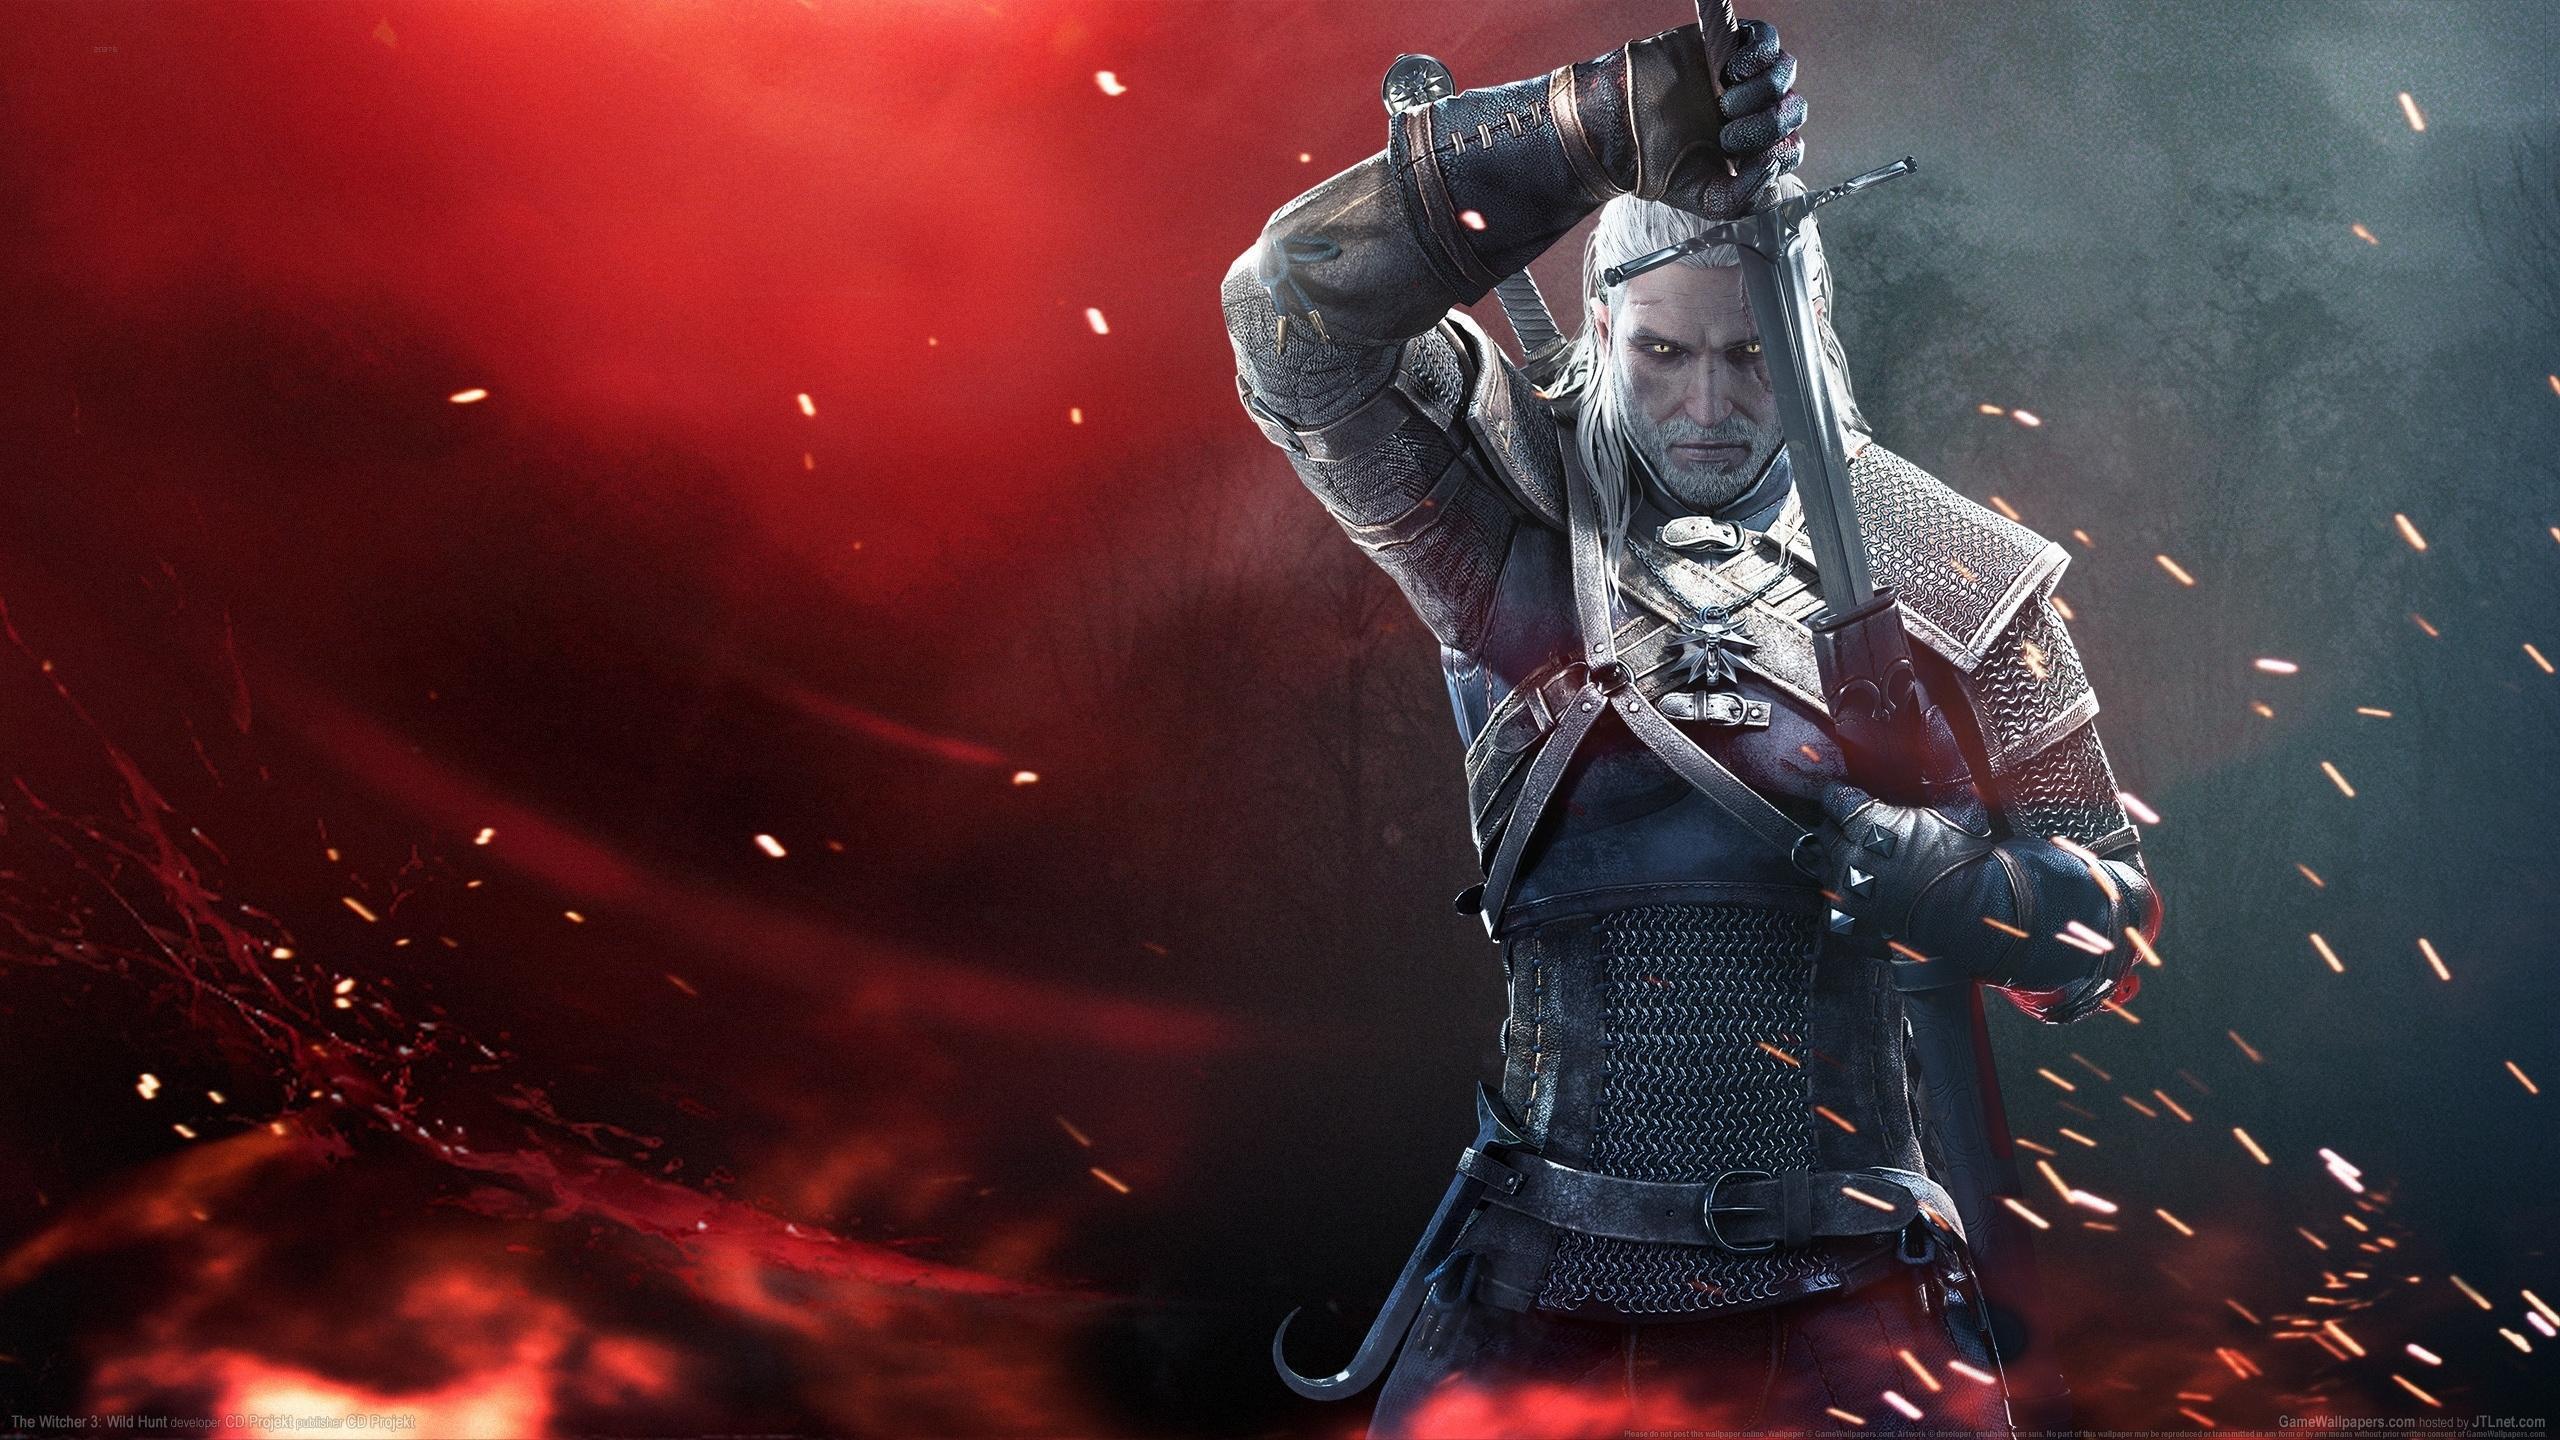 2560 x 1440 · jpeg - Witcher 3 Animated Wallpaper - 2560x1440 - Download HD Wallpaper ...